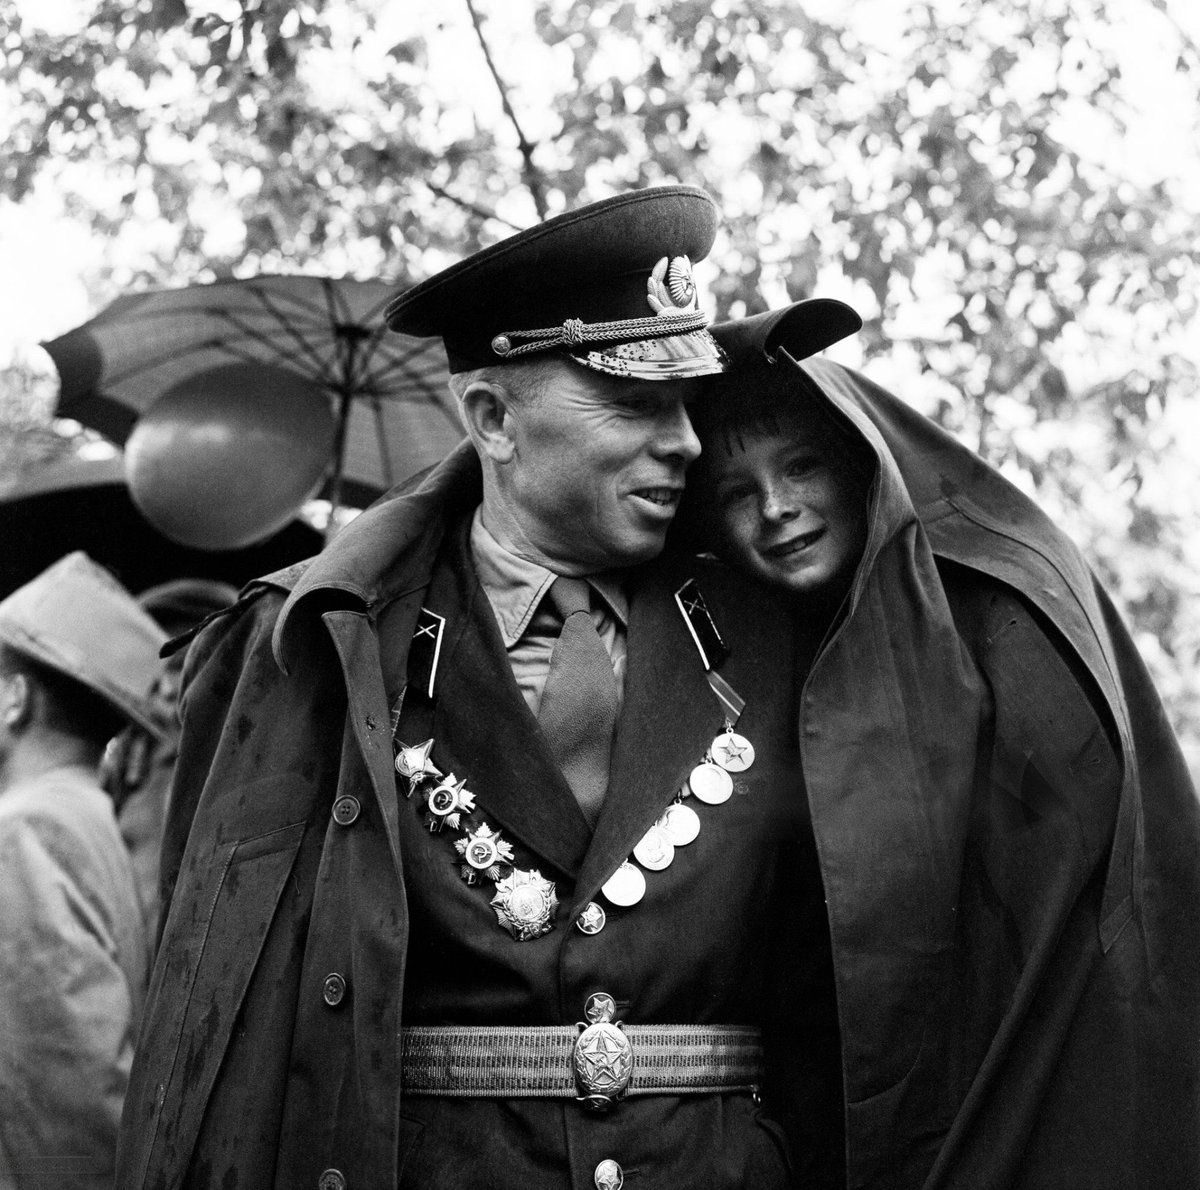 A soldier shelters his son from the rain during May Day celebrations in Tbilisi, 1960 (photo by Bela Zola)